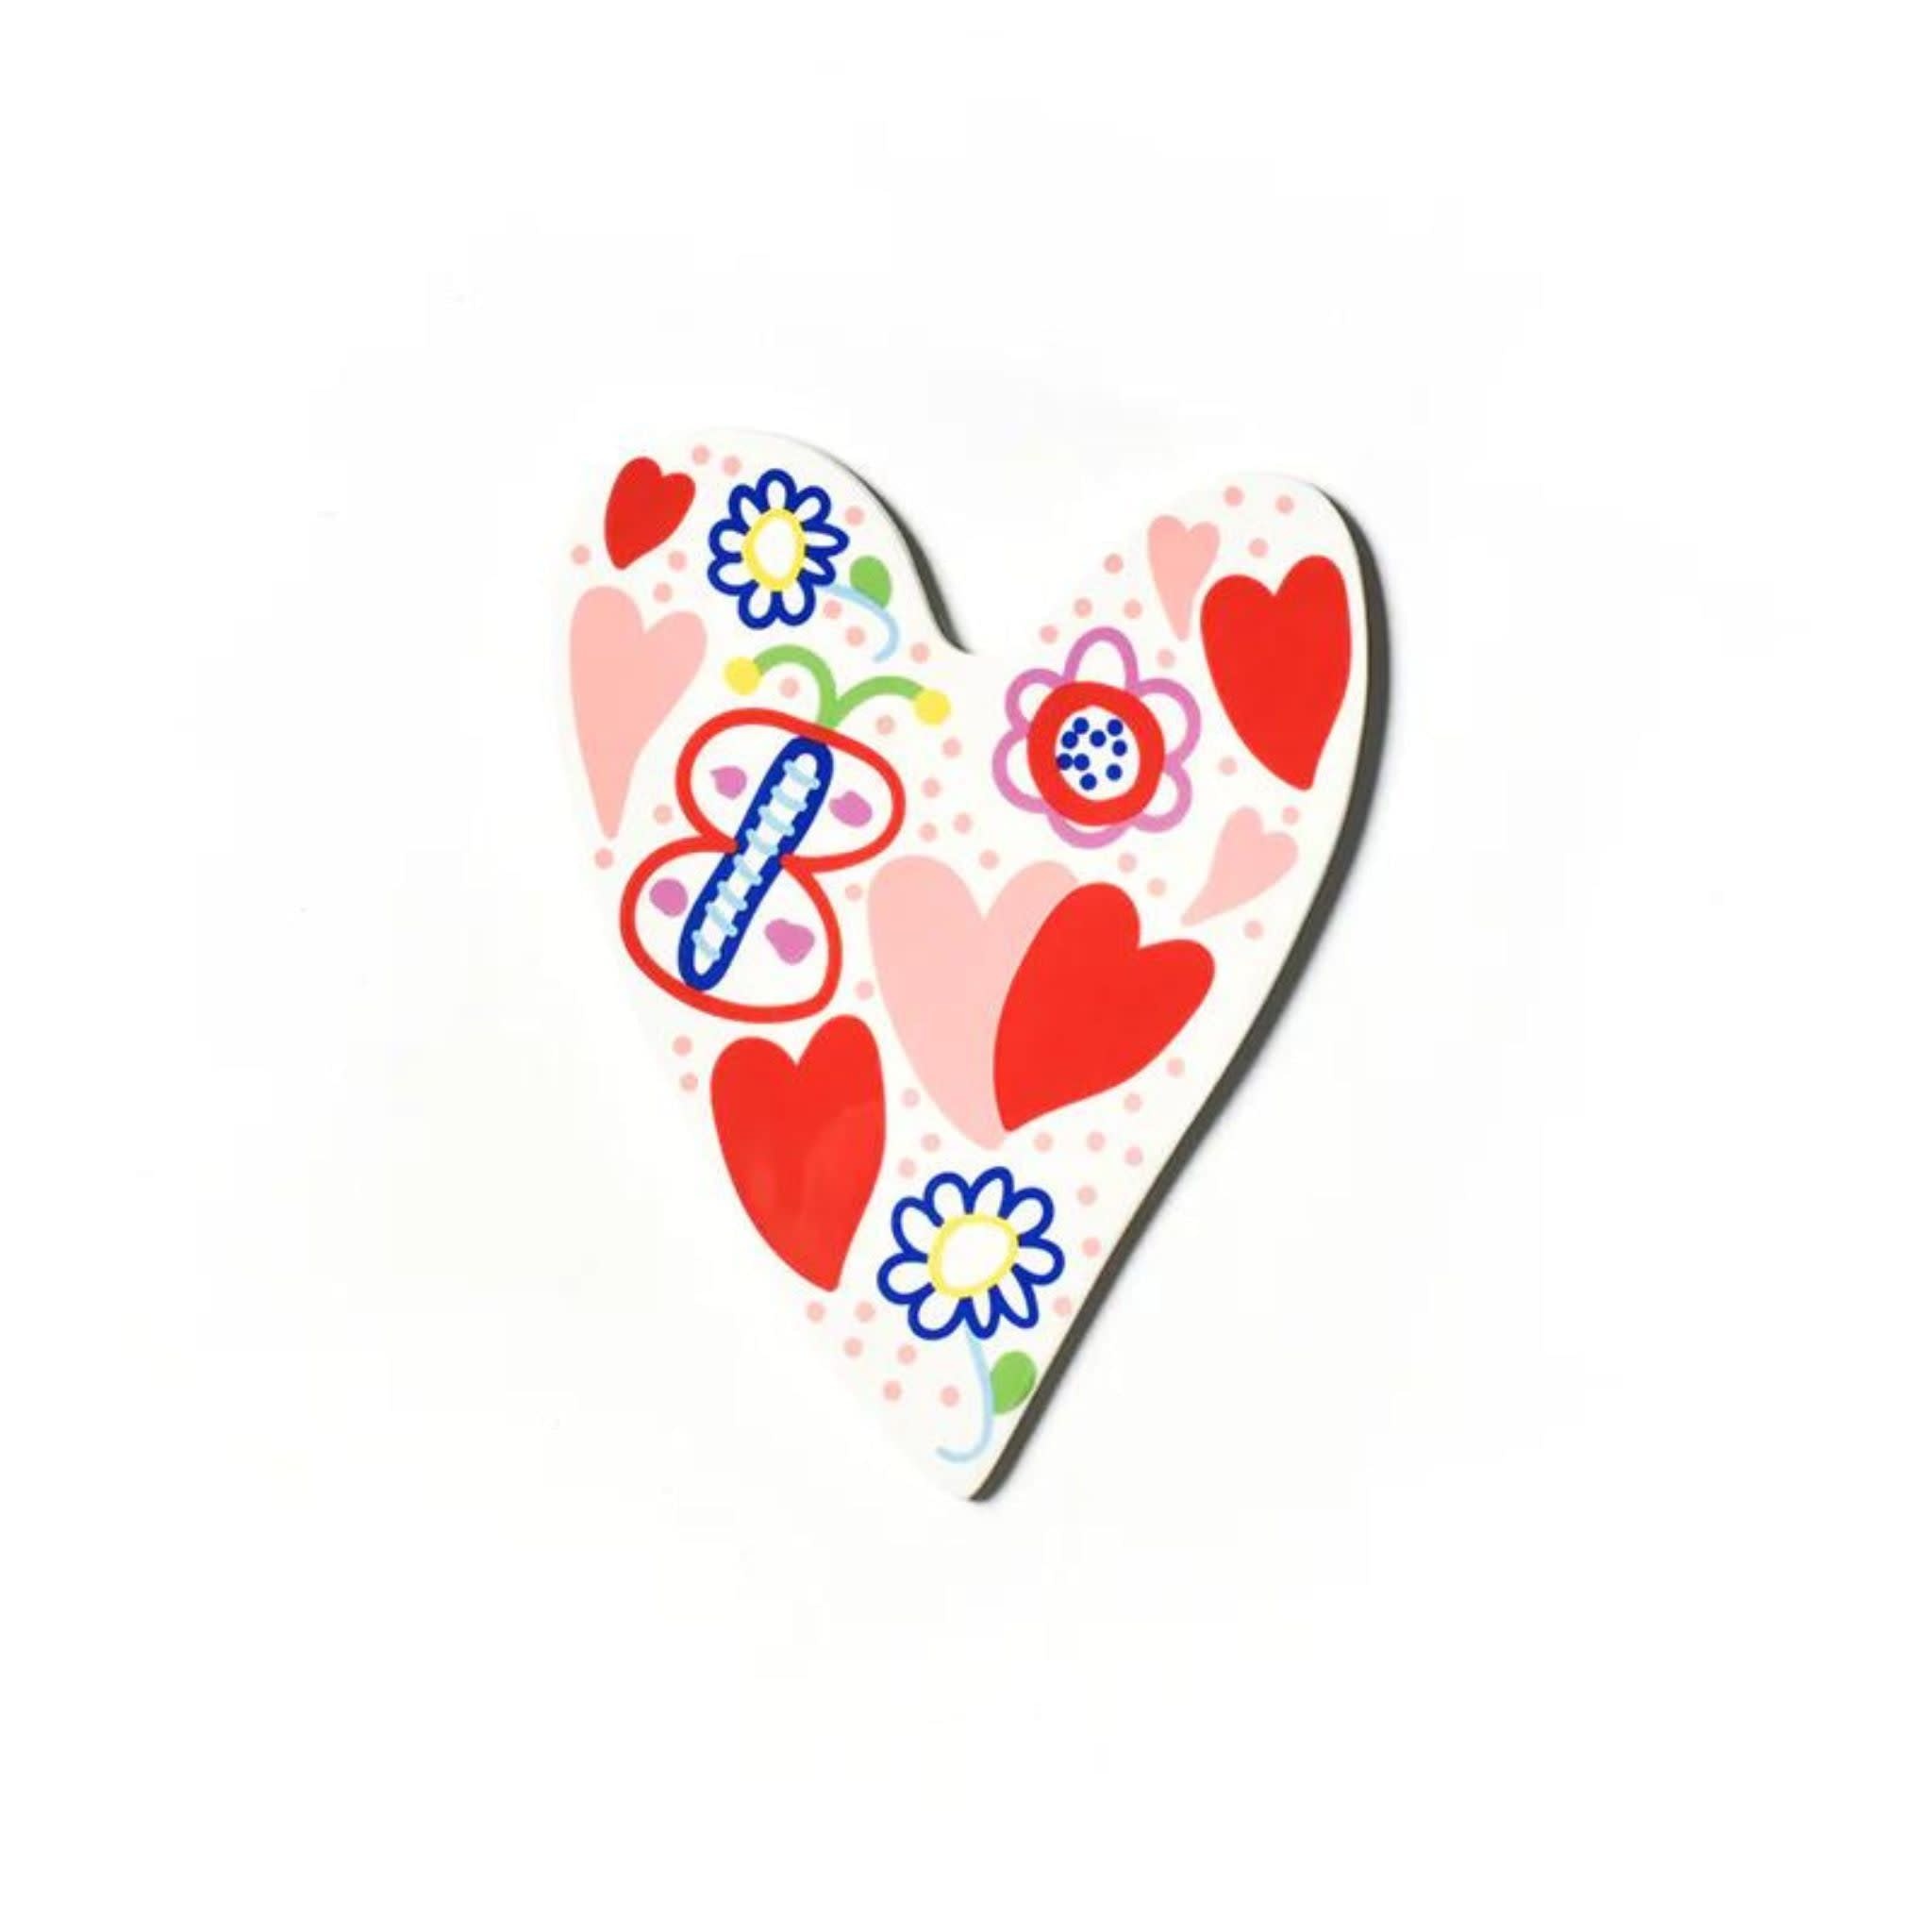 Mini hearts of JMJ – 4 sticker SHEET – Outpouring of Trust